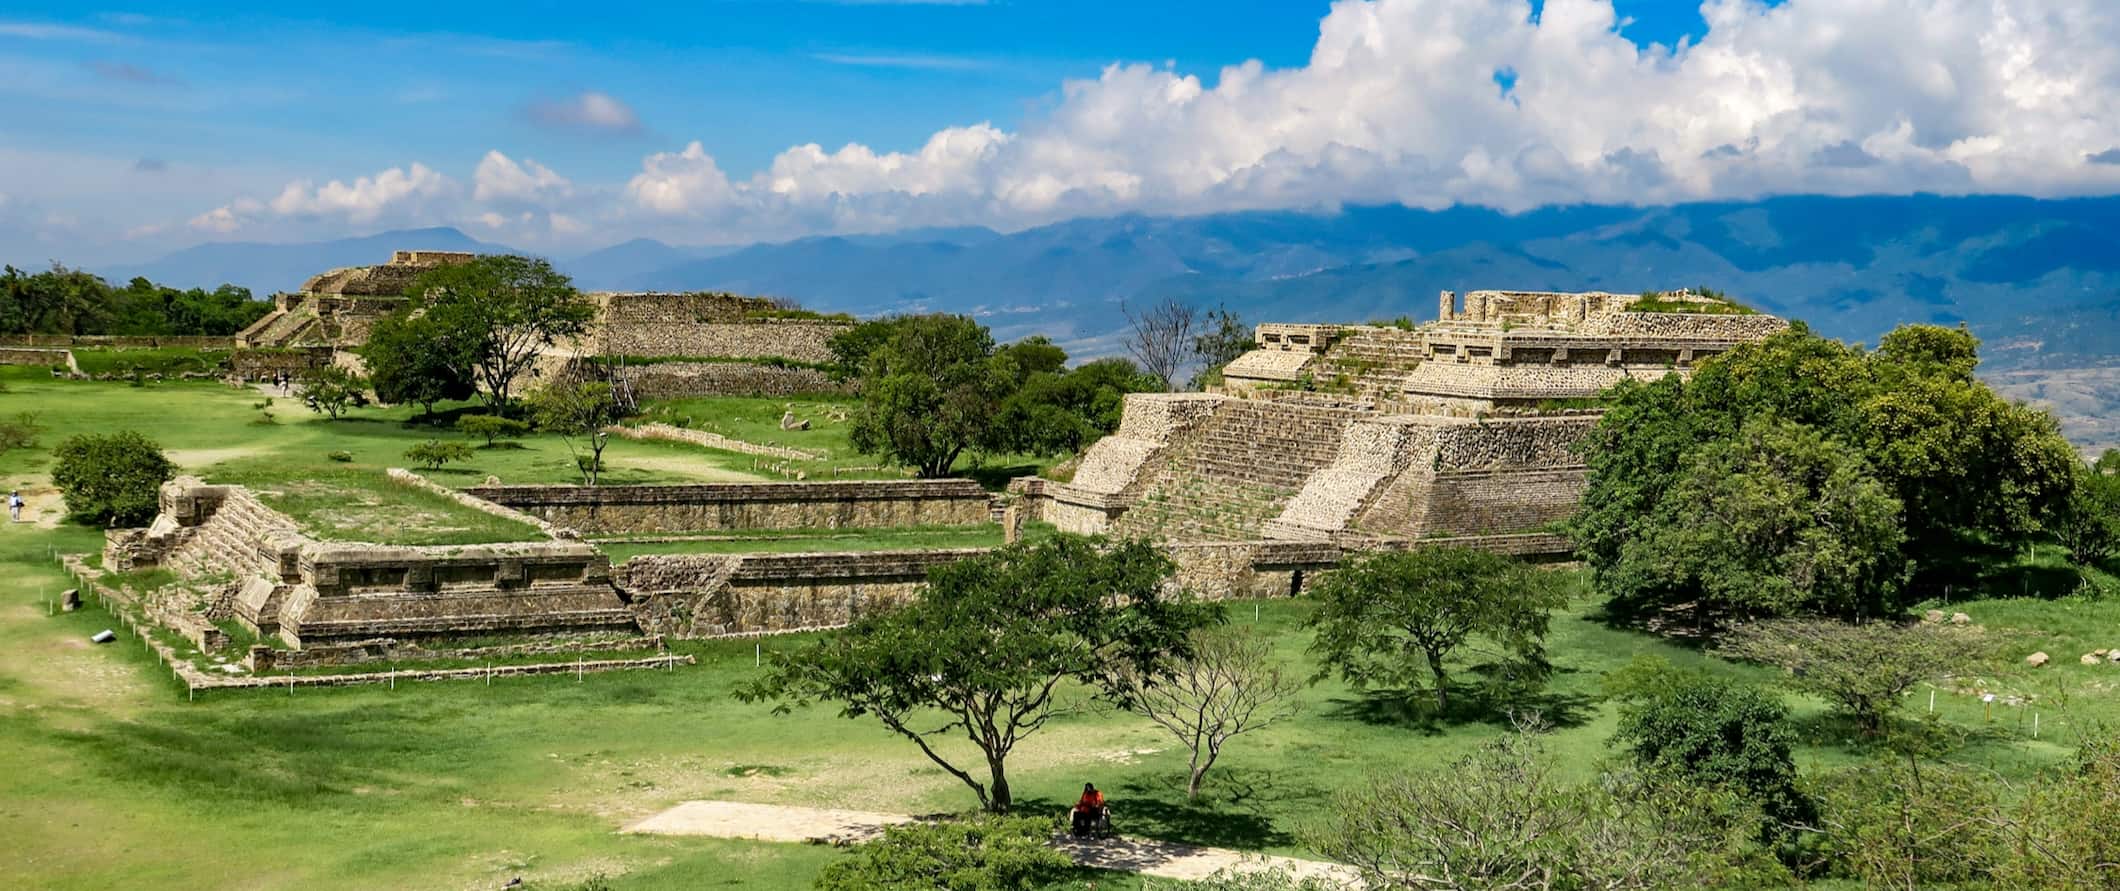 The ancient site of Monte Alban and its historic ruins near Oaxaca, Mexico